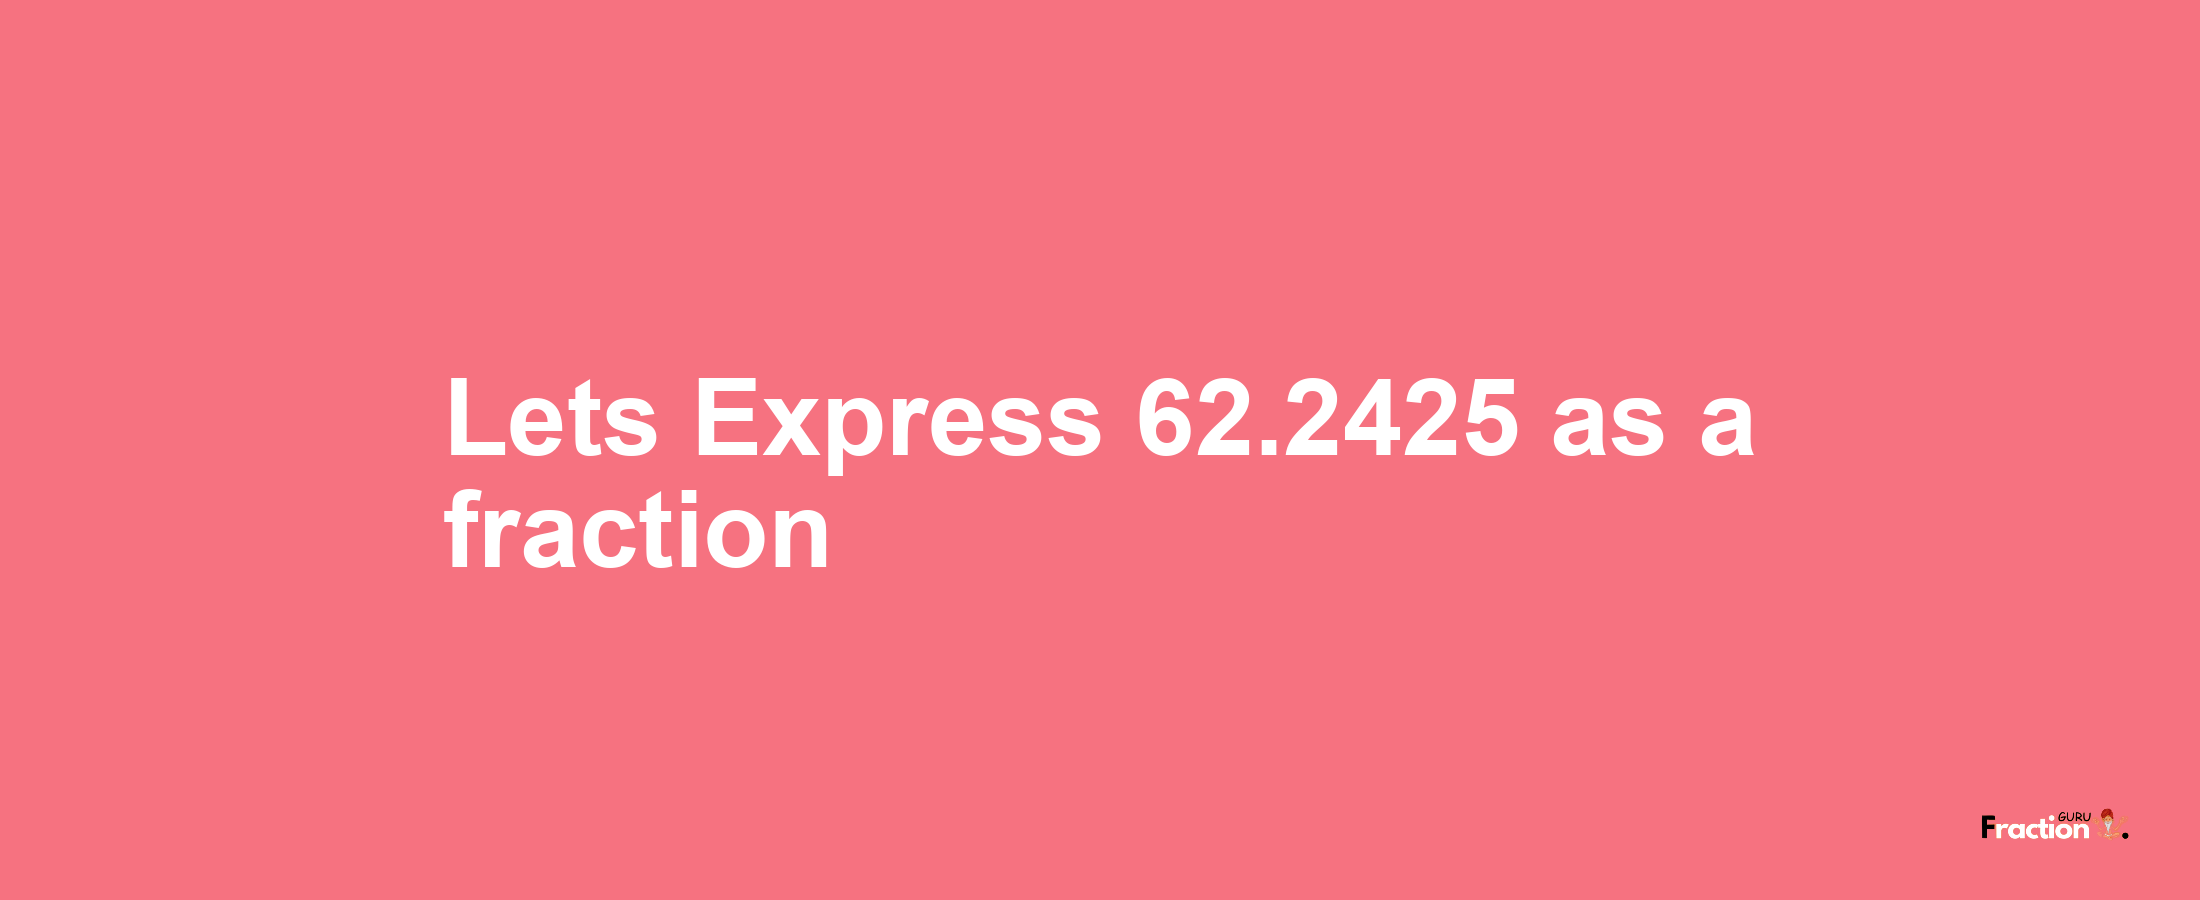 Lets Express 62.2425 as afraction